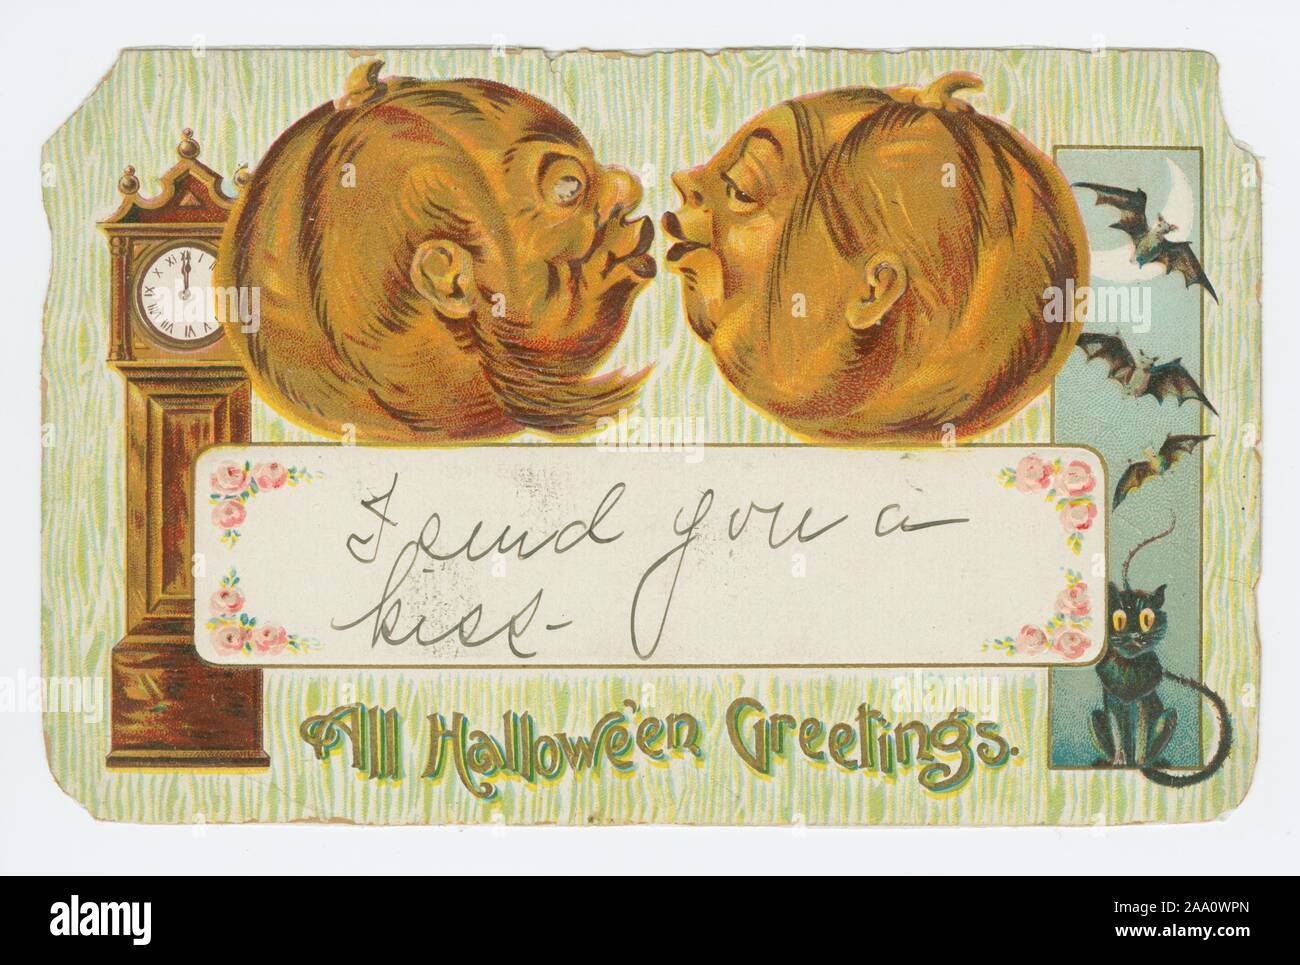 Illustrated postcard titled 'All Hallowe'en Greetings' featuring an illustration of two Halloween pumpkins kissing, with a grandfather clock on the left and a black cat and three bats on the right, published by Dreyfuss and Davis Gottschalk, 1908. From the New York Public Library. () Stock Photo